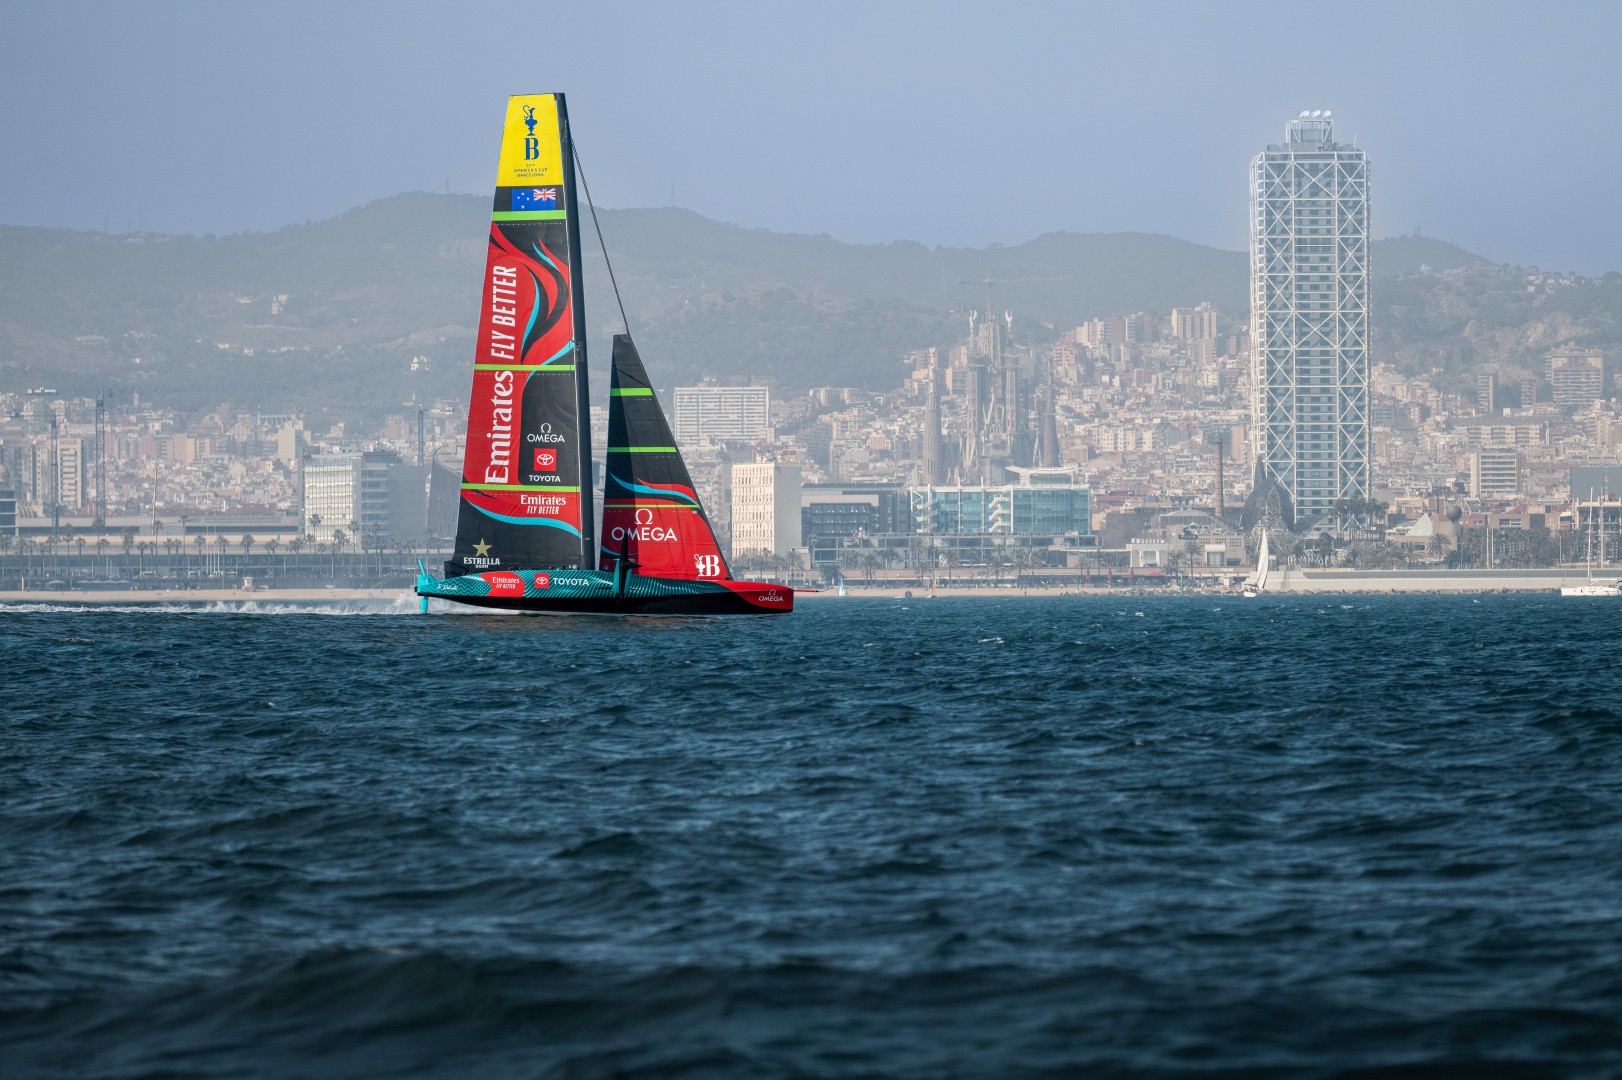 Louis Vuitton 37th America's Cup racing schedule announced